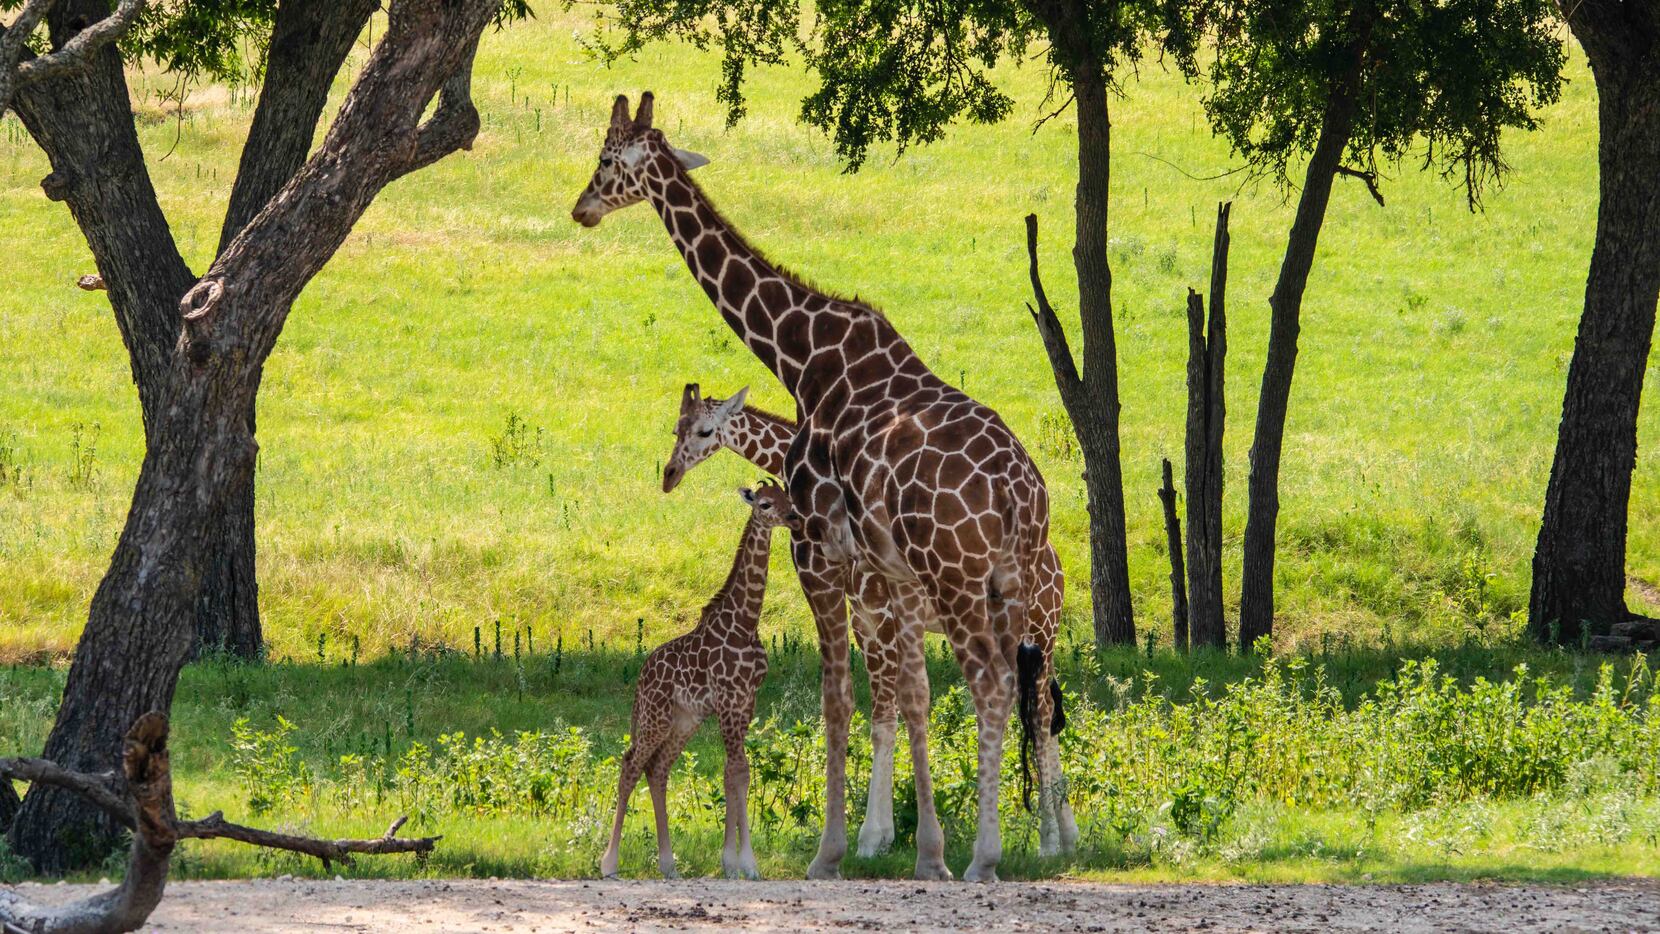 The Fossil Rim Wildlife Center in Glen Rose welcomed its 12th giraffe to the herd on July...